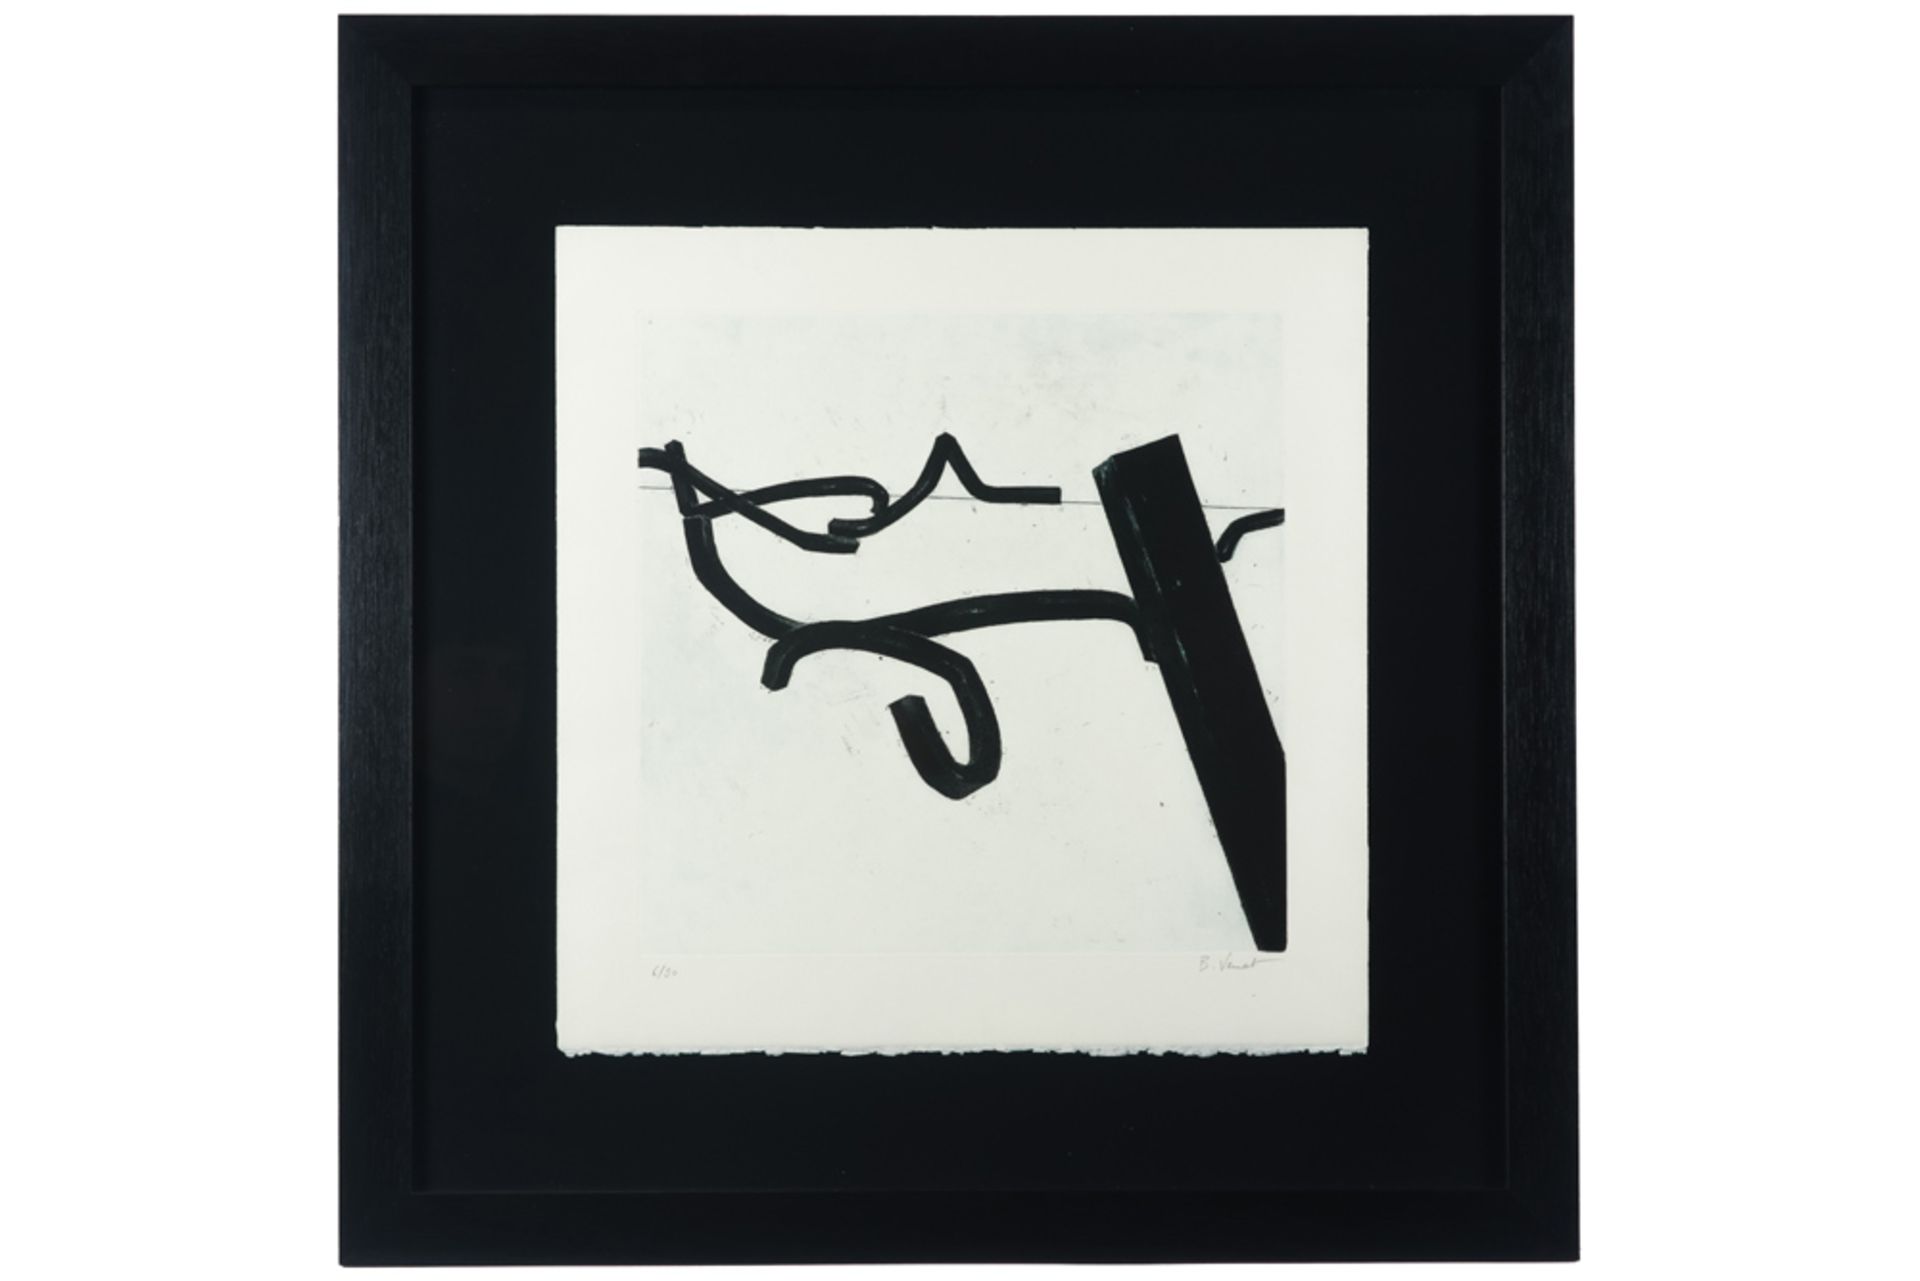 Bernar Venet signed mixed media print (aquatint and etching) with a typical composition dd 1998 || - Image 3 of 3